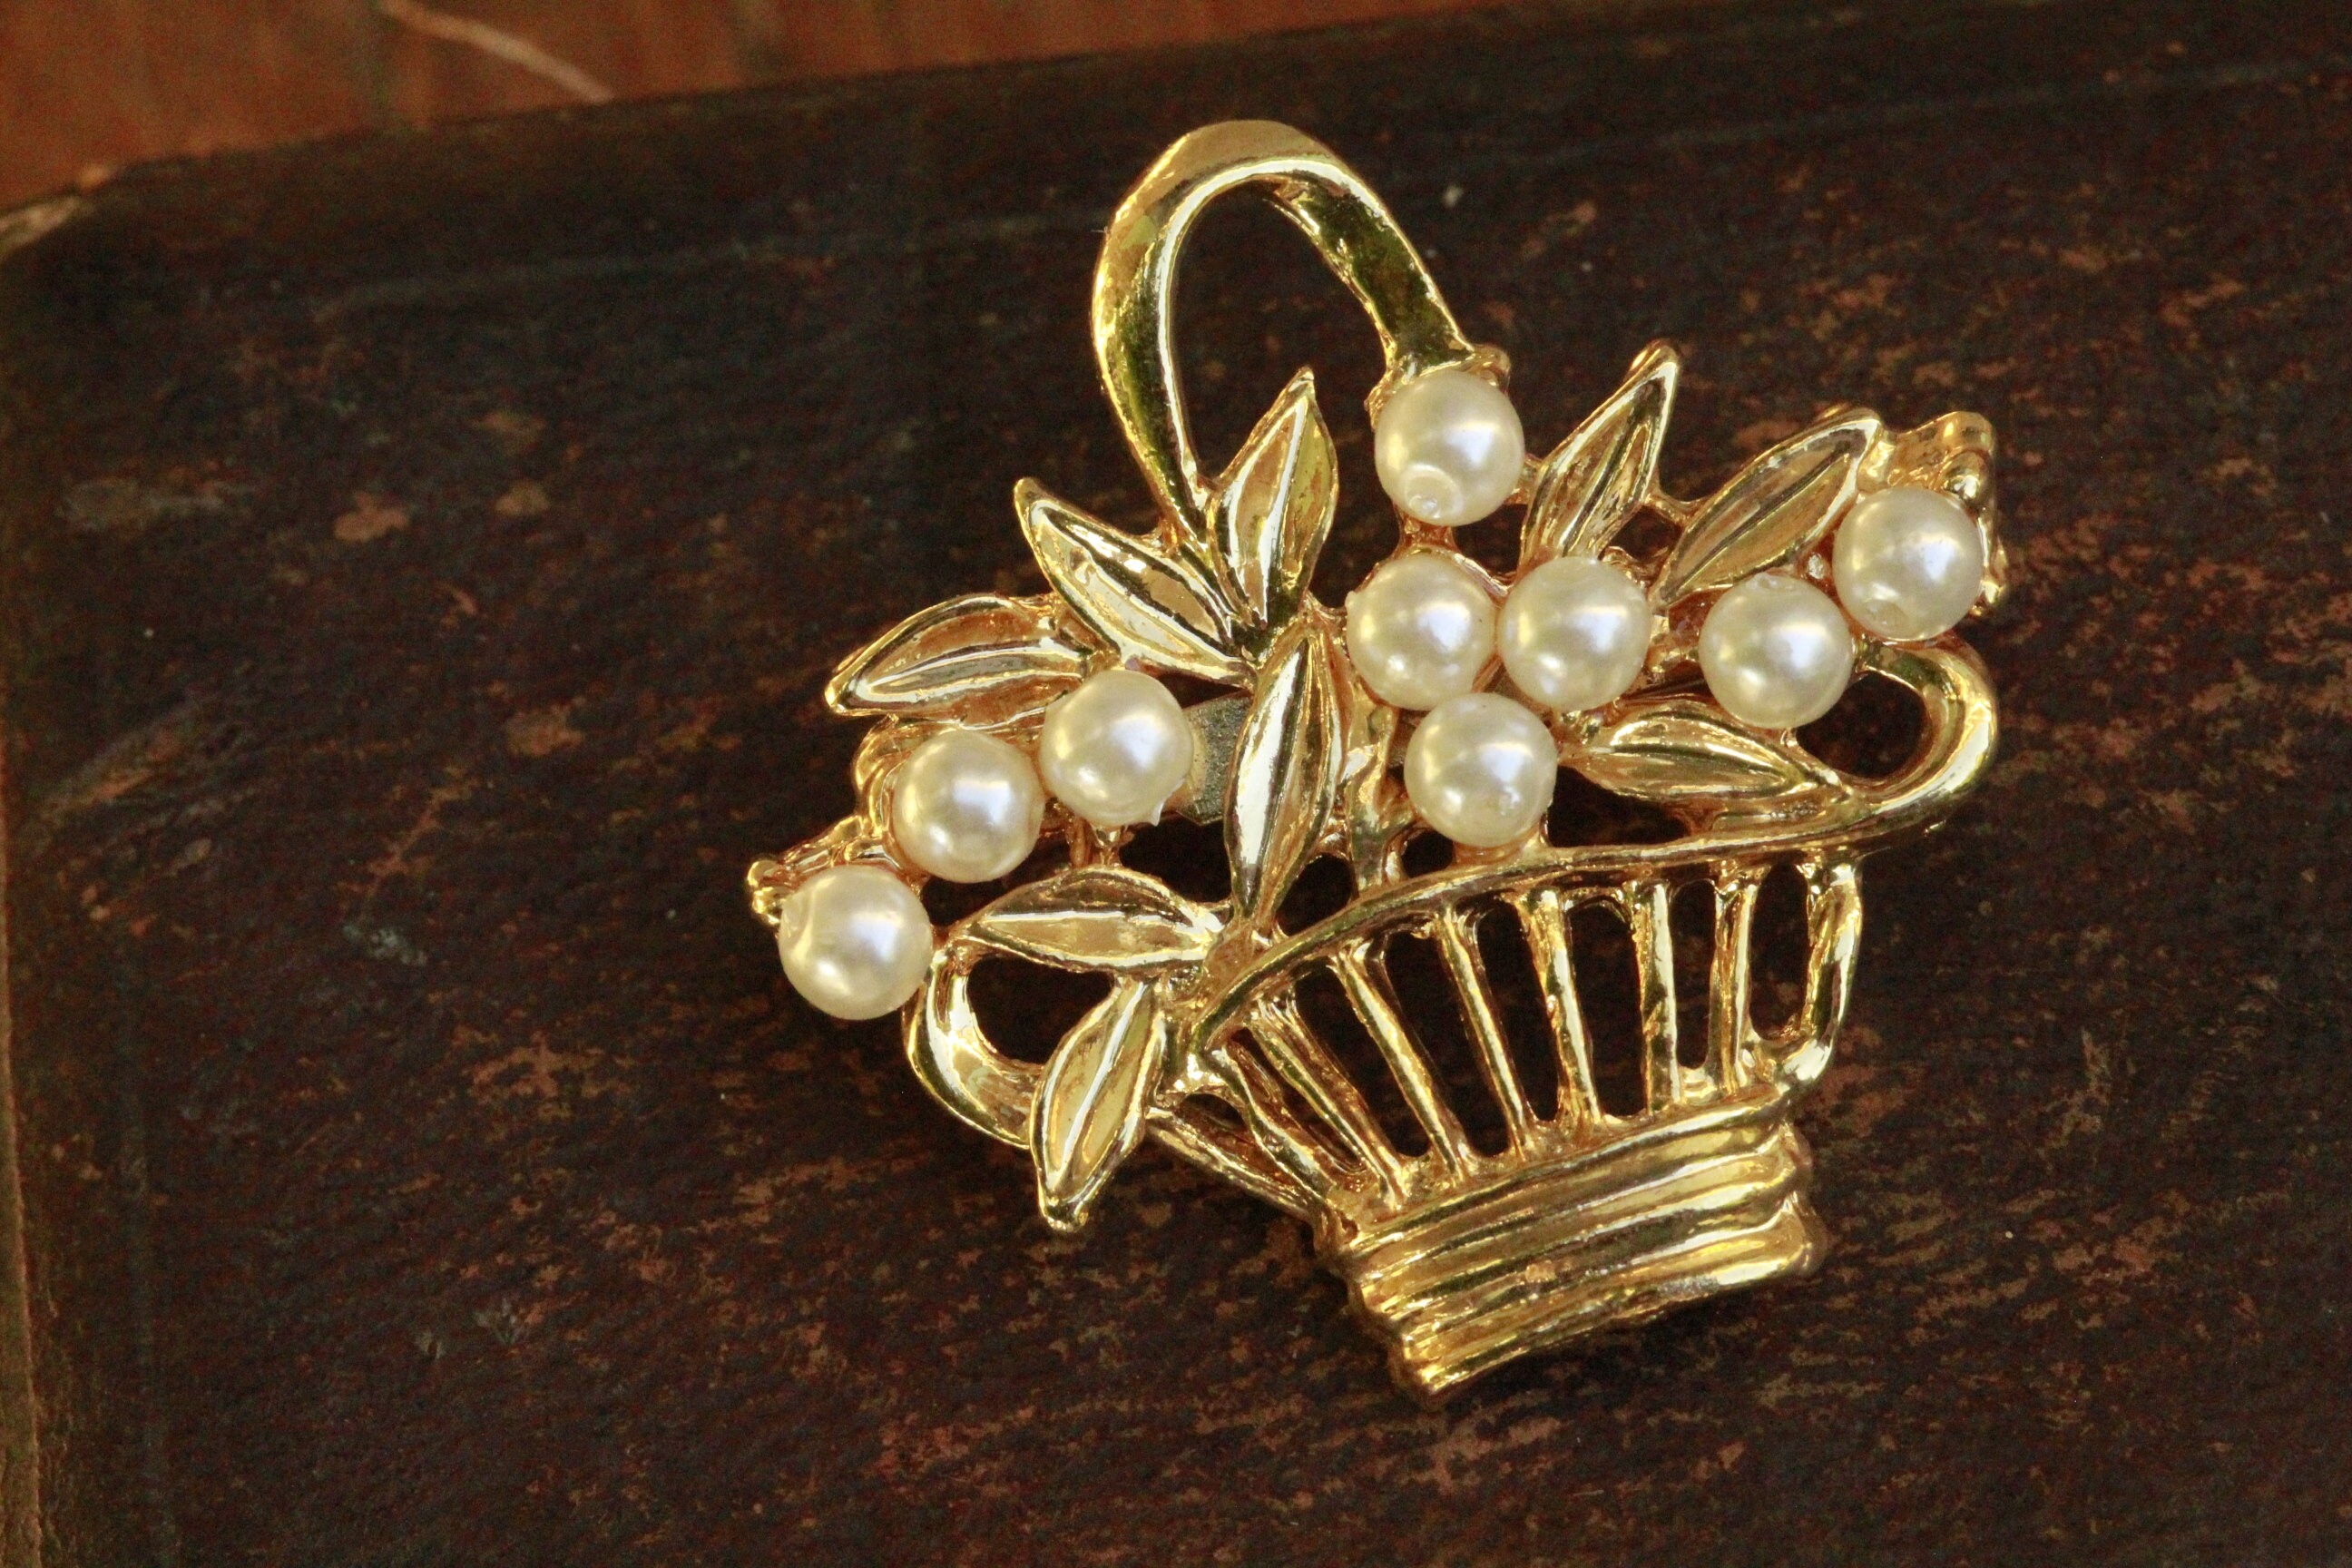 Glass-head Sewing Pins, Choose Pearl or Class, Easter Basket